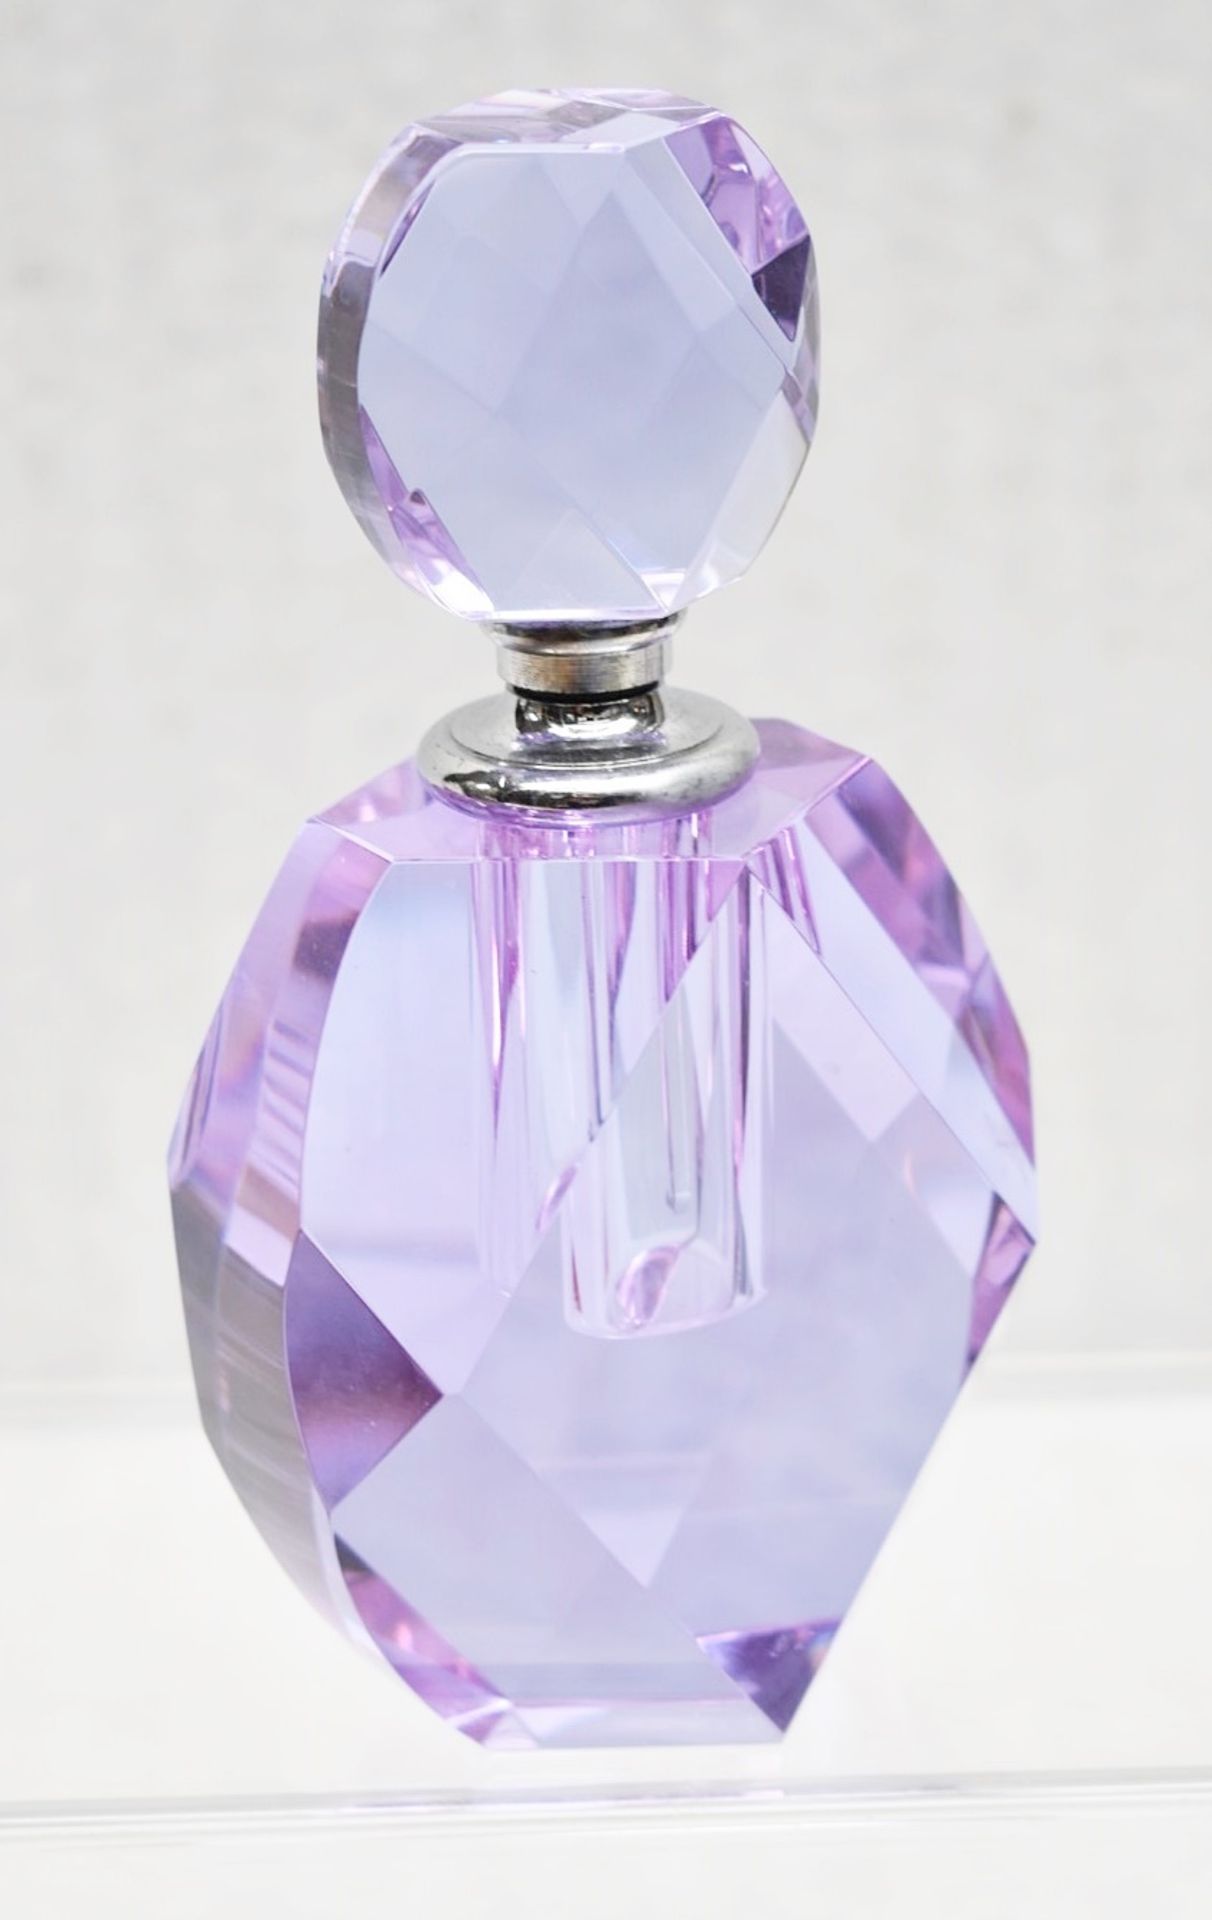 2 x Vintage-Style Cut Glass Perfume Bottles In Purple / Pink - Image 5 of 5